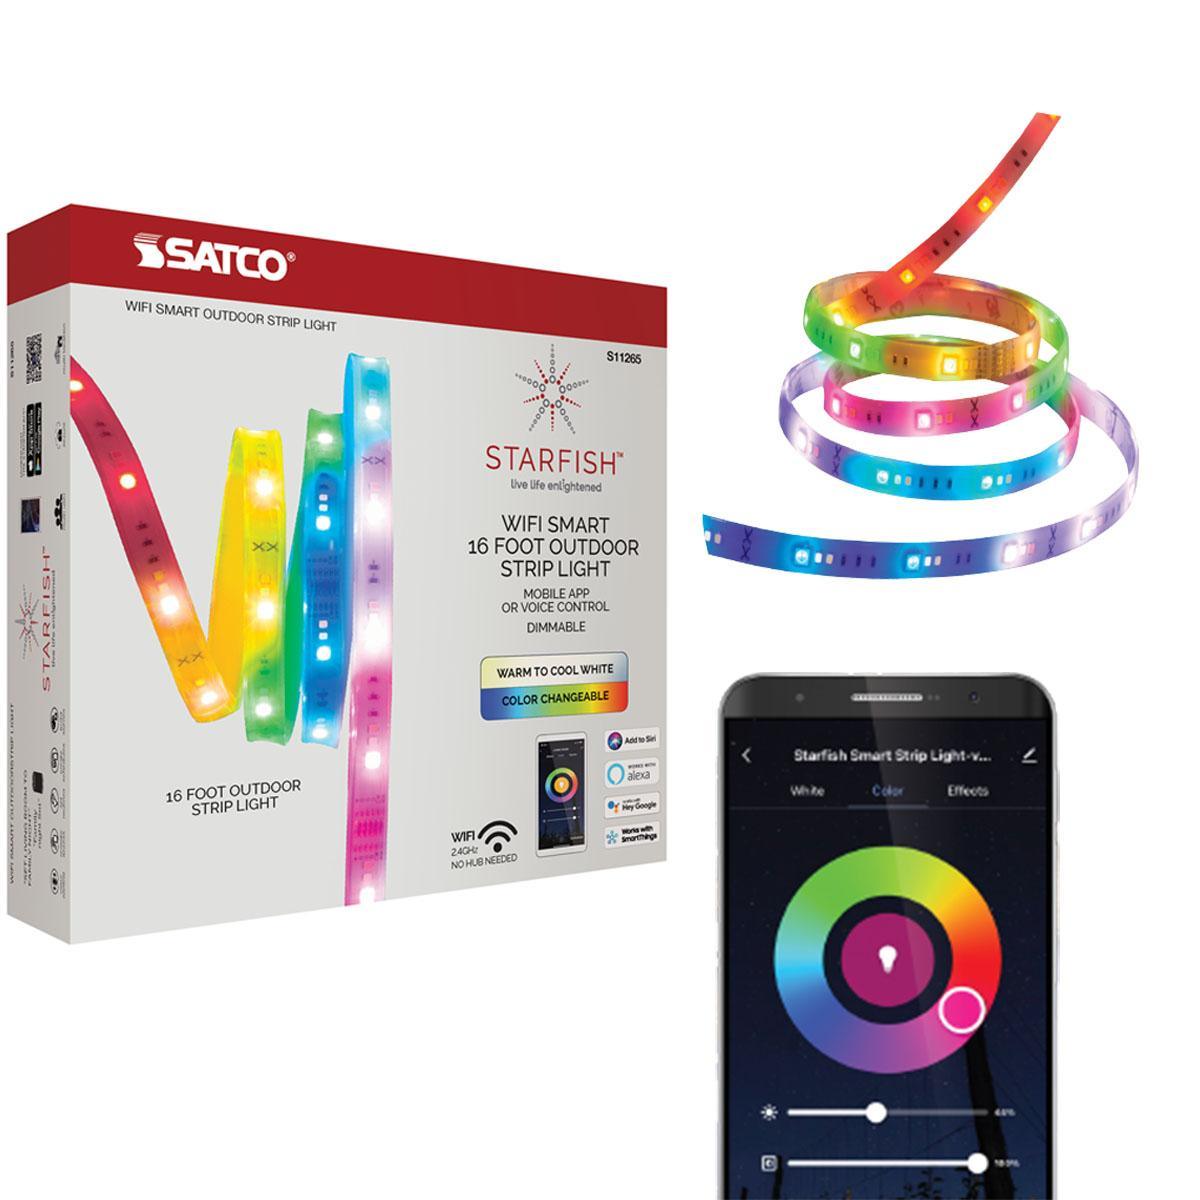 Starfish Wifi Smart Outdoor LED Strip Light kit, 16 feet Tape with Power Supply, Color Changing RGB and Tunable White, 12V